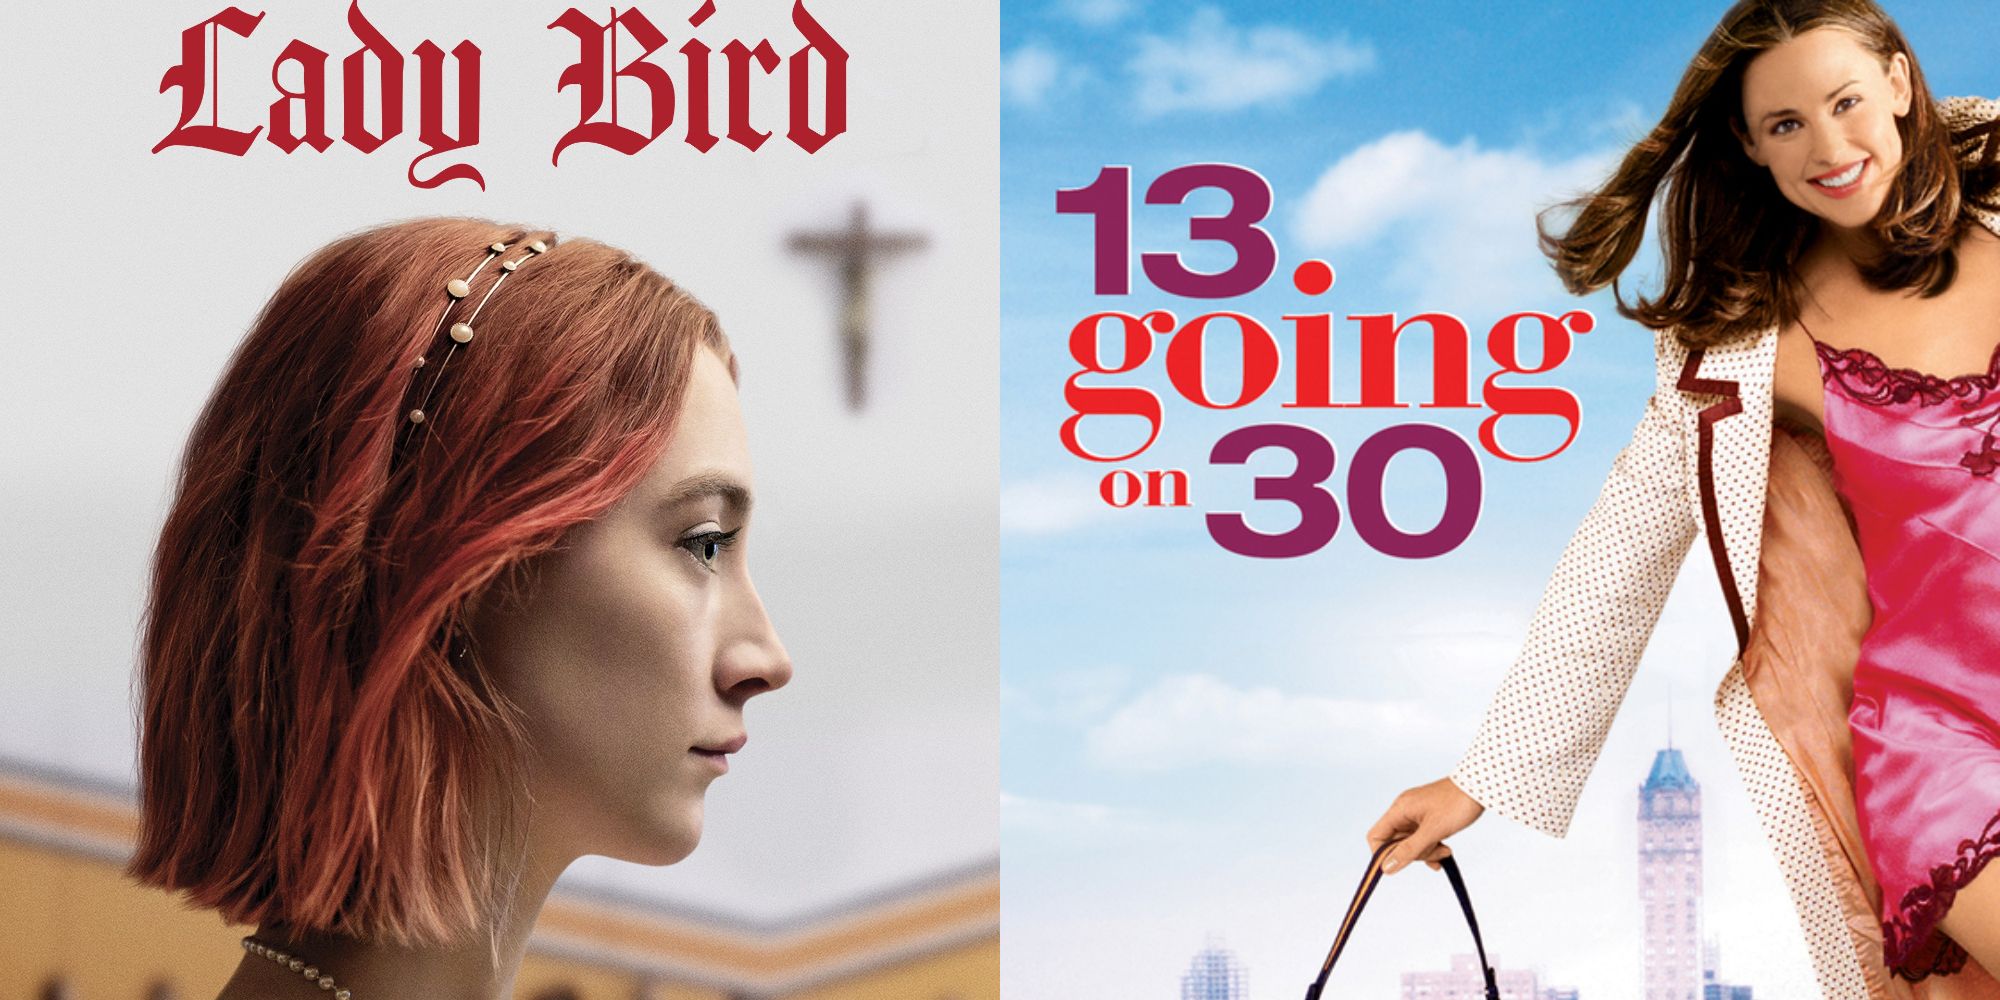 Split image showing posters for Lady Bird and 13 Going on 30.